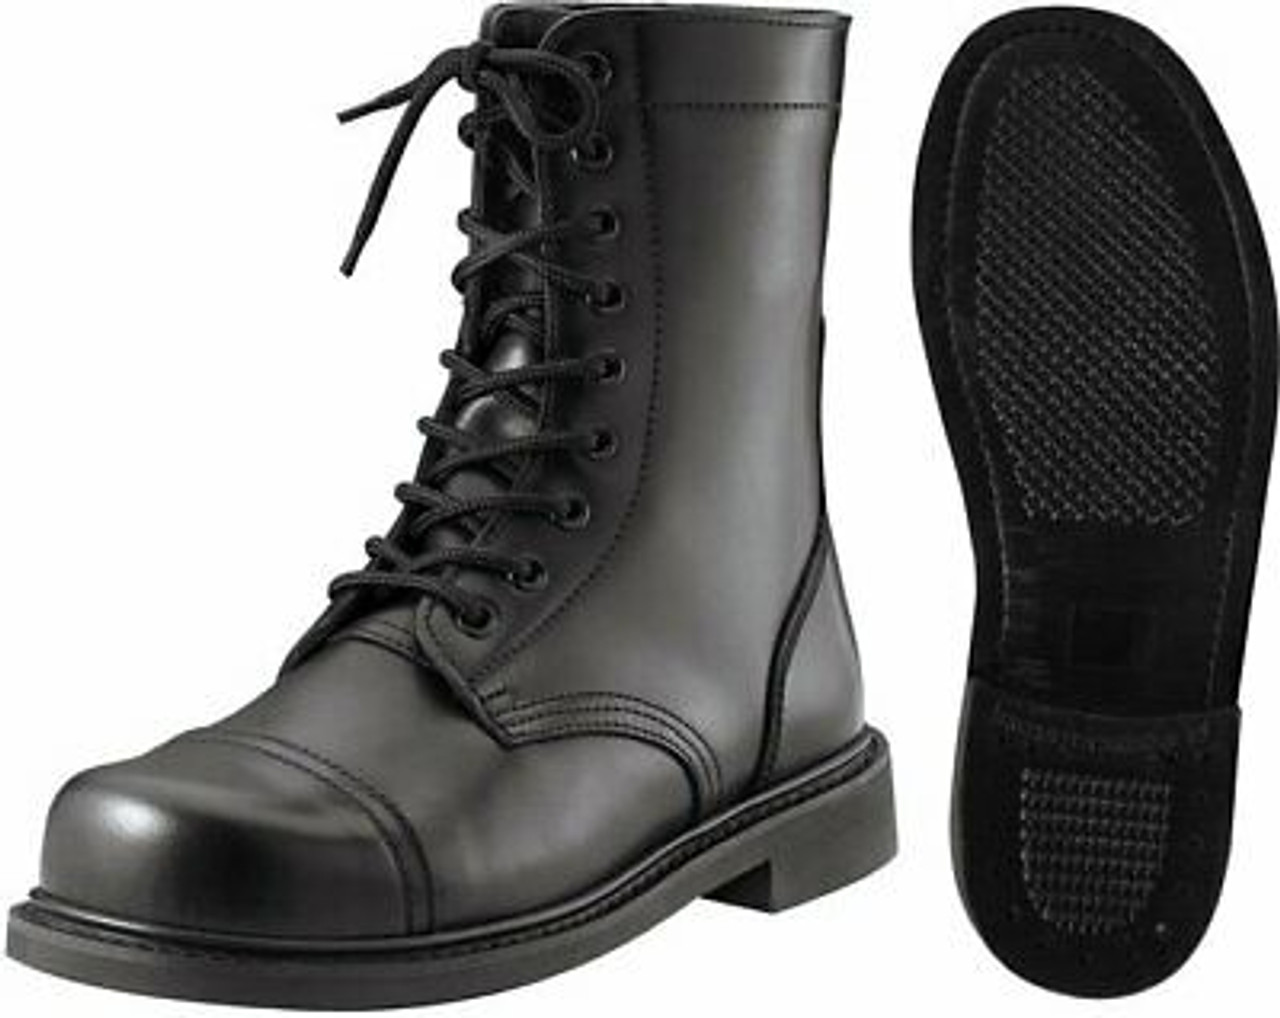 Afspejling span Ordinere Black Military Leather Boots, Tactical Combat Uniform Boots